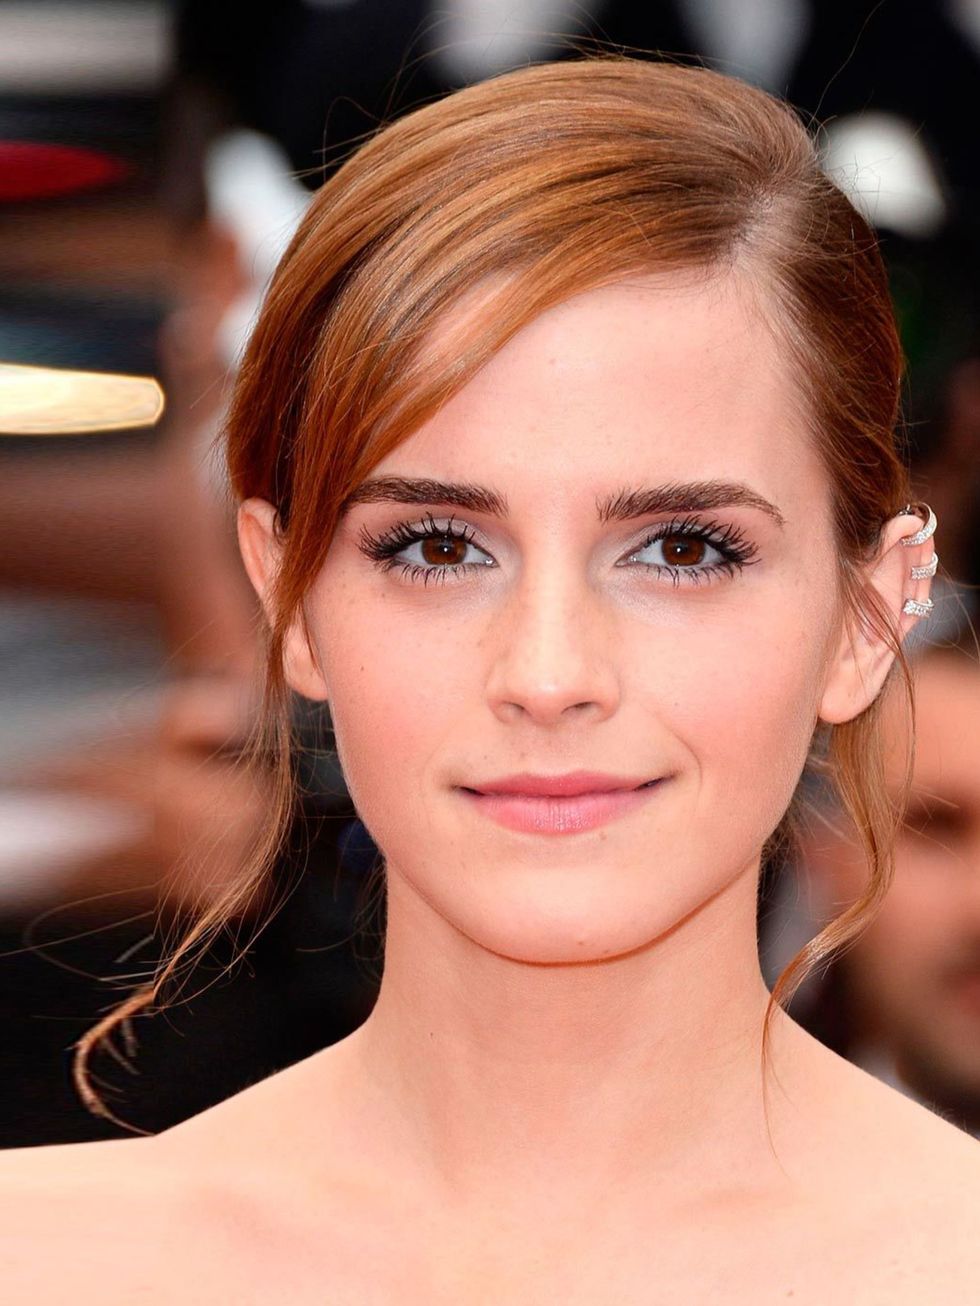 <p><a href="http://www.elleuk.com/star-style/celebrity-style-files/emma-watson"></a></p><p>A fresh face and some uber-lashes makes for a soft, pretty look.</p>